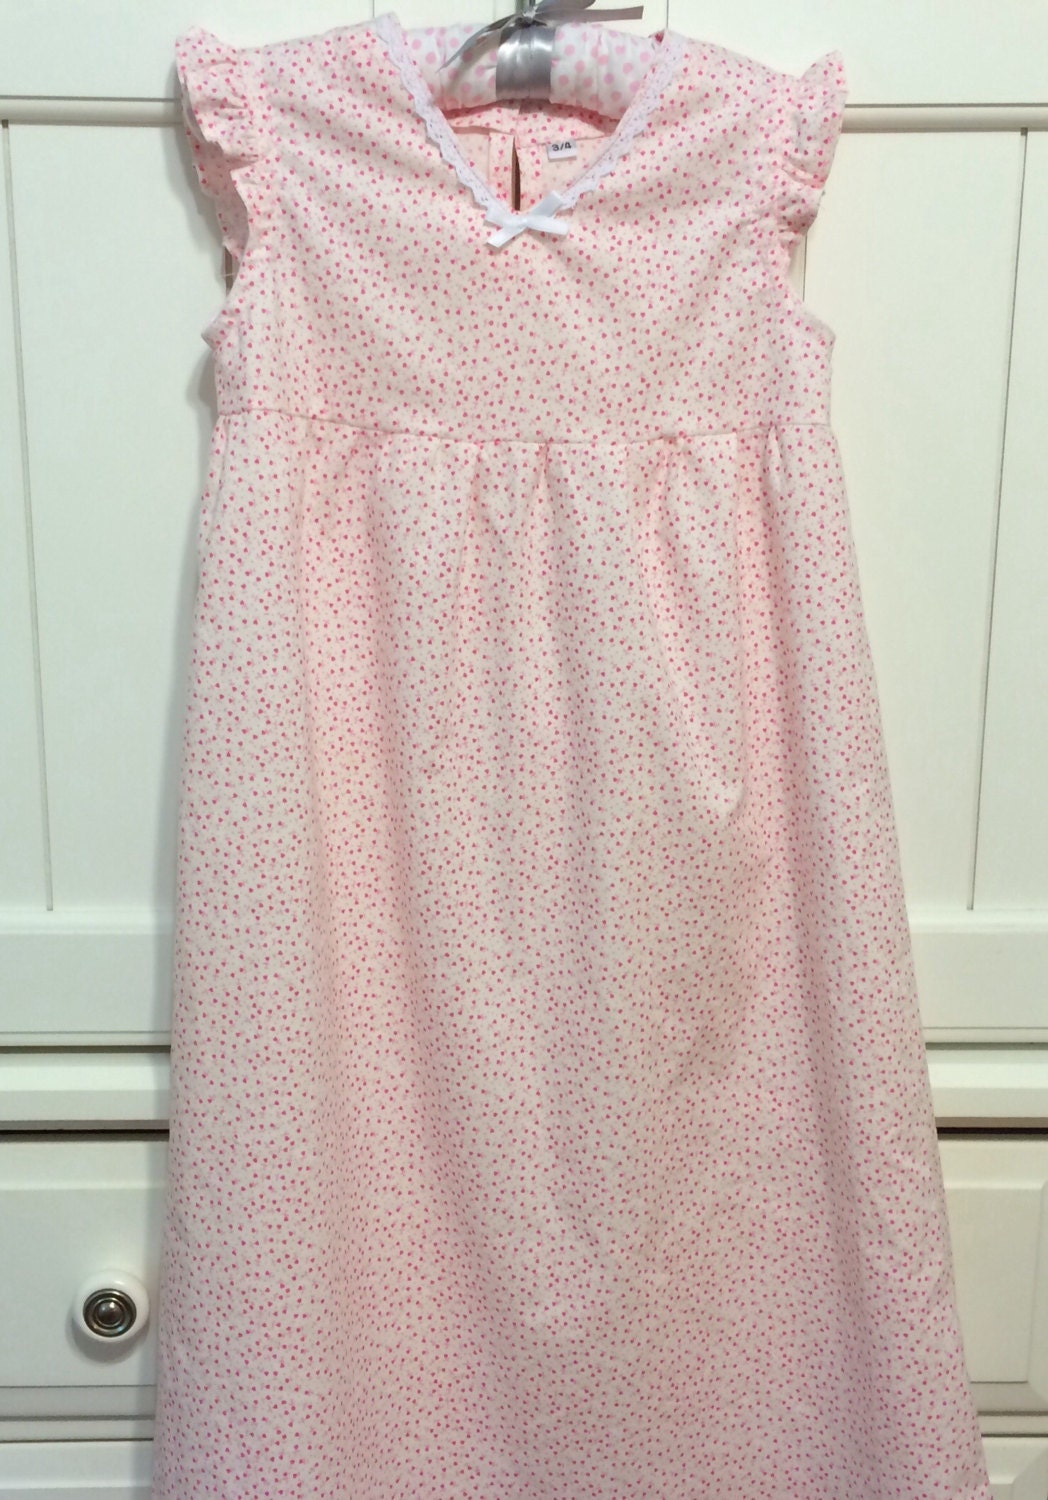 Sweet Pink All Cotton Child's Nightgown with Ruffled Cap